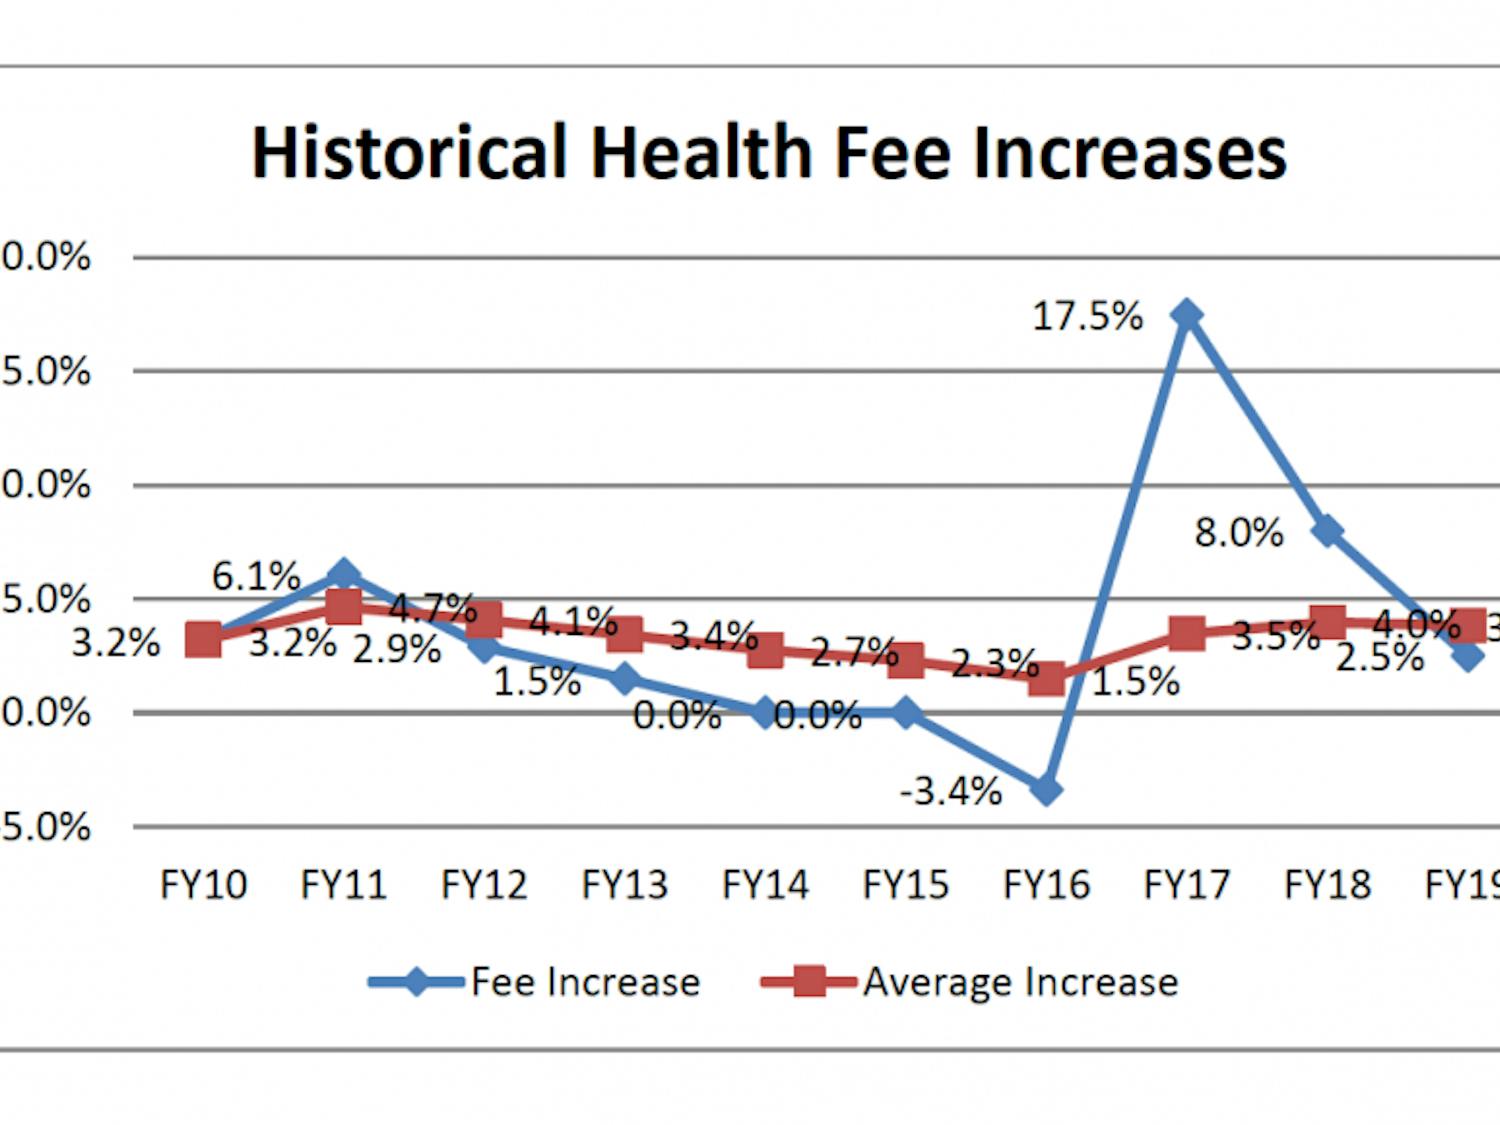 University Health Services included this graph in their budget proposal to show the requested health fee increase since 2010, and the average requested increase over time. For 2019 they asked a 2.5 percent increase, less than the average. 